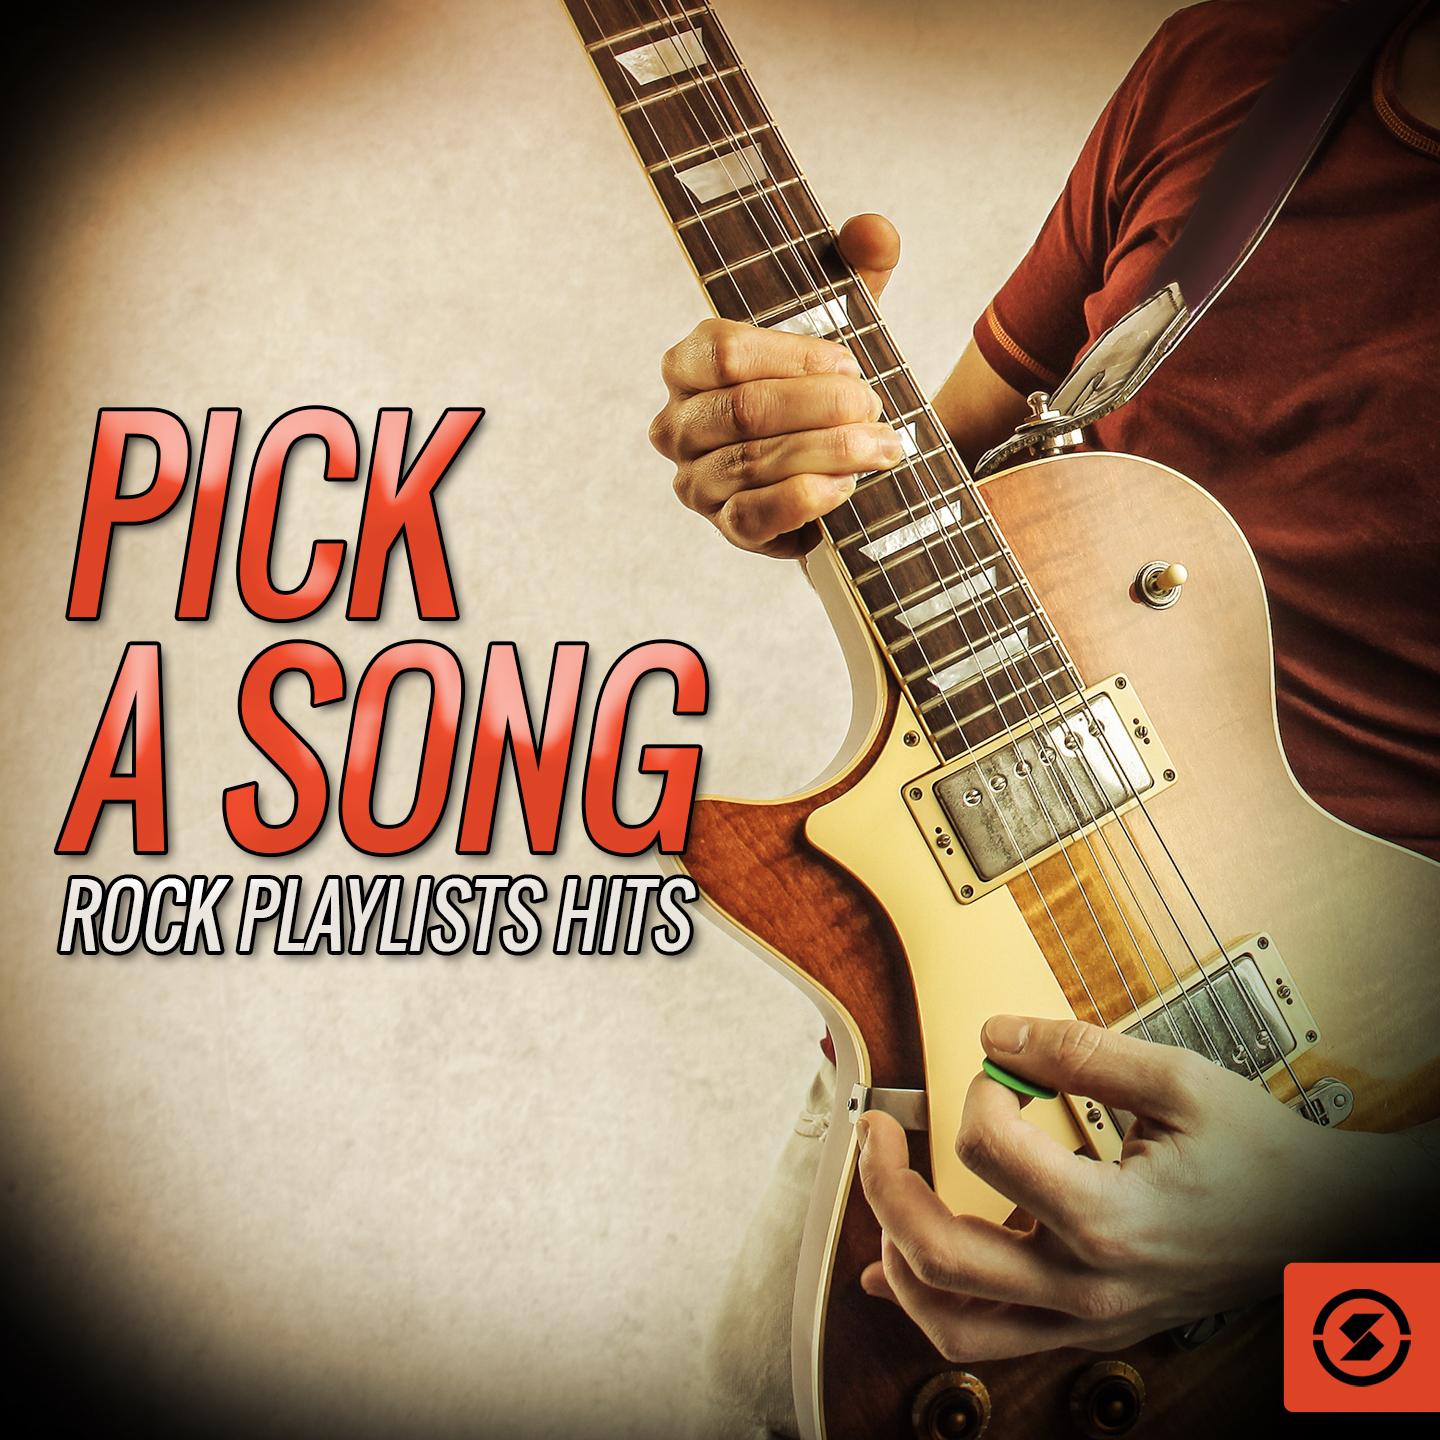 Pick A Song: Rock Playlists Hits